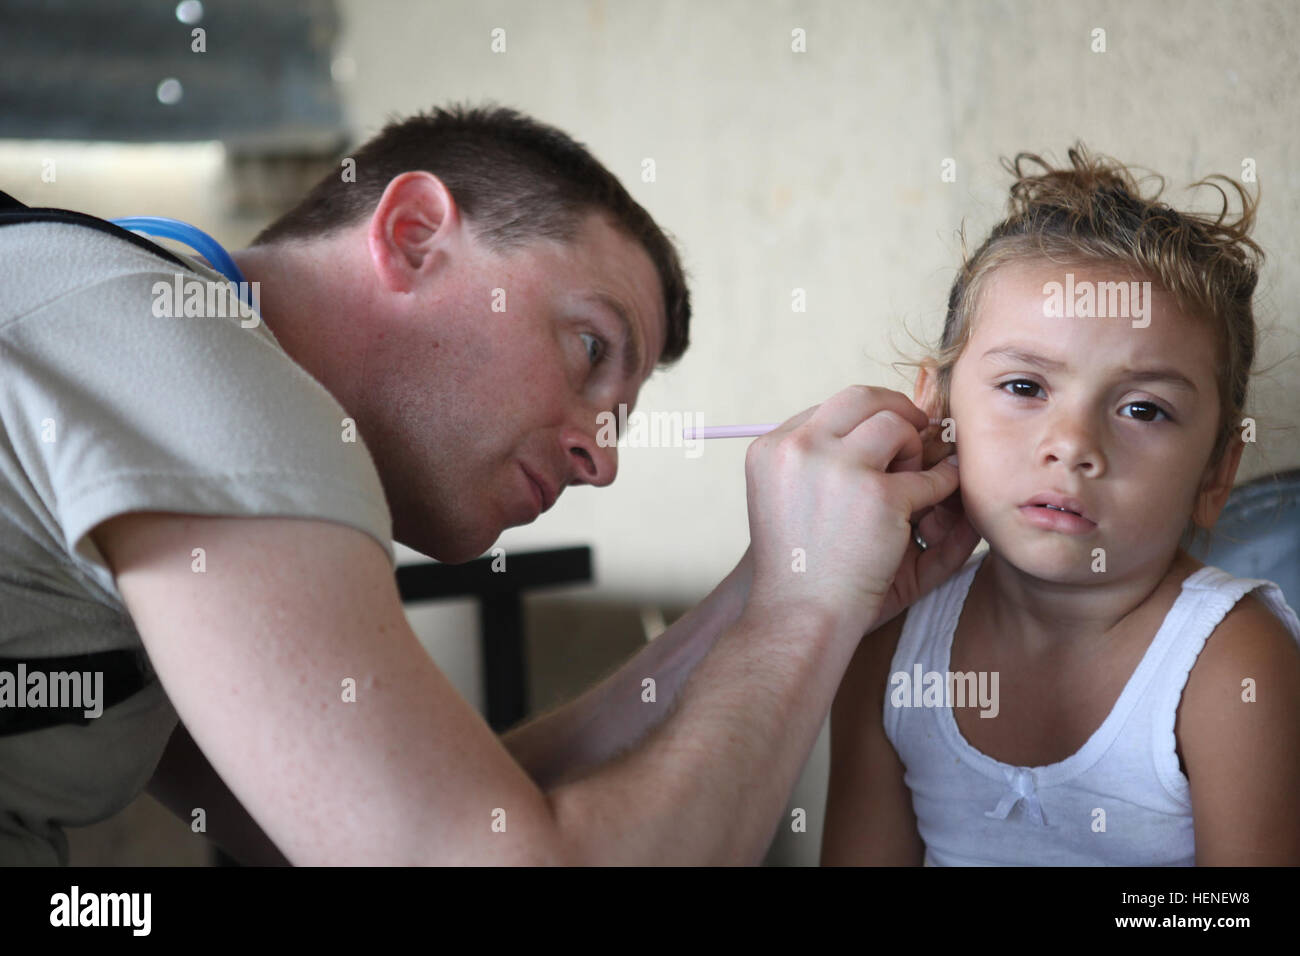 US Air Force Cpt. Charles Pace, assigned to 42nd Medical Group, examines a Guatemalan child during a Medical Readiness Training Exercise during Beyond the Horizon 2014, Zacapa, Guatemala, Apr. 22, 2014. Beyond the Horizon is an annual exercise that embraces the partnership between the United States and Guatemala, to provide focused humanitarian assistance through various medical, dental, and civic action programs. (U.S. Army photo by Spc. Gary Silverman)(Released) Beyond the Horizon 2014, Guatemala 140422-A-TO648-411 Stock Photo